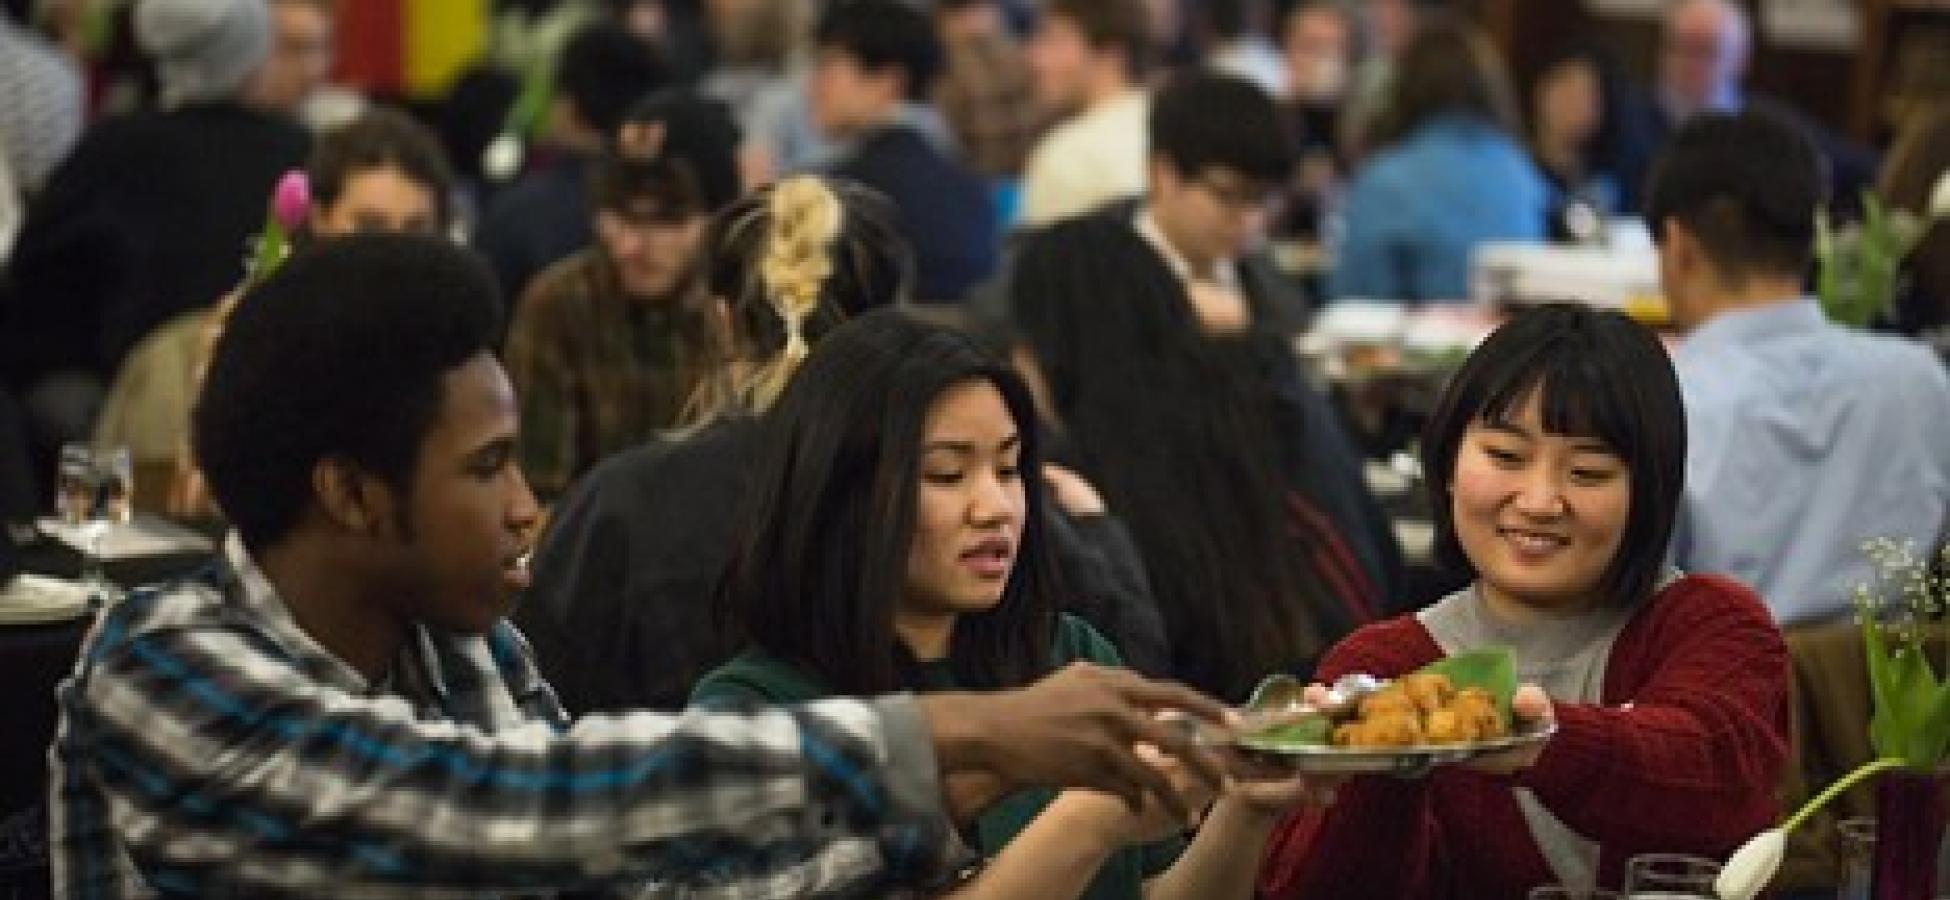 Students eating at gathering in dining hall.